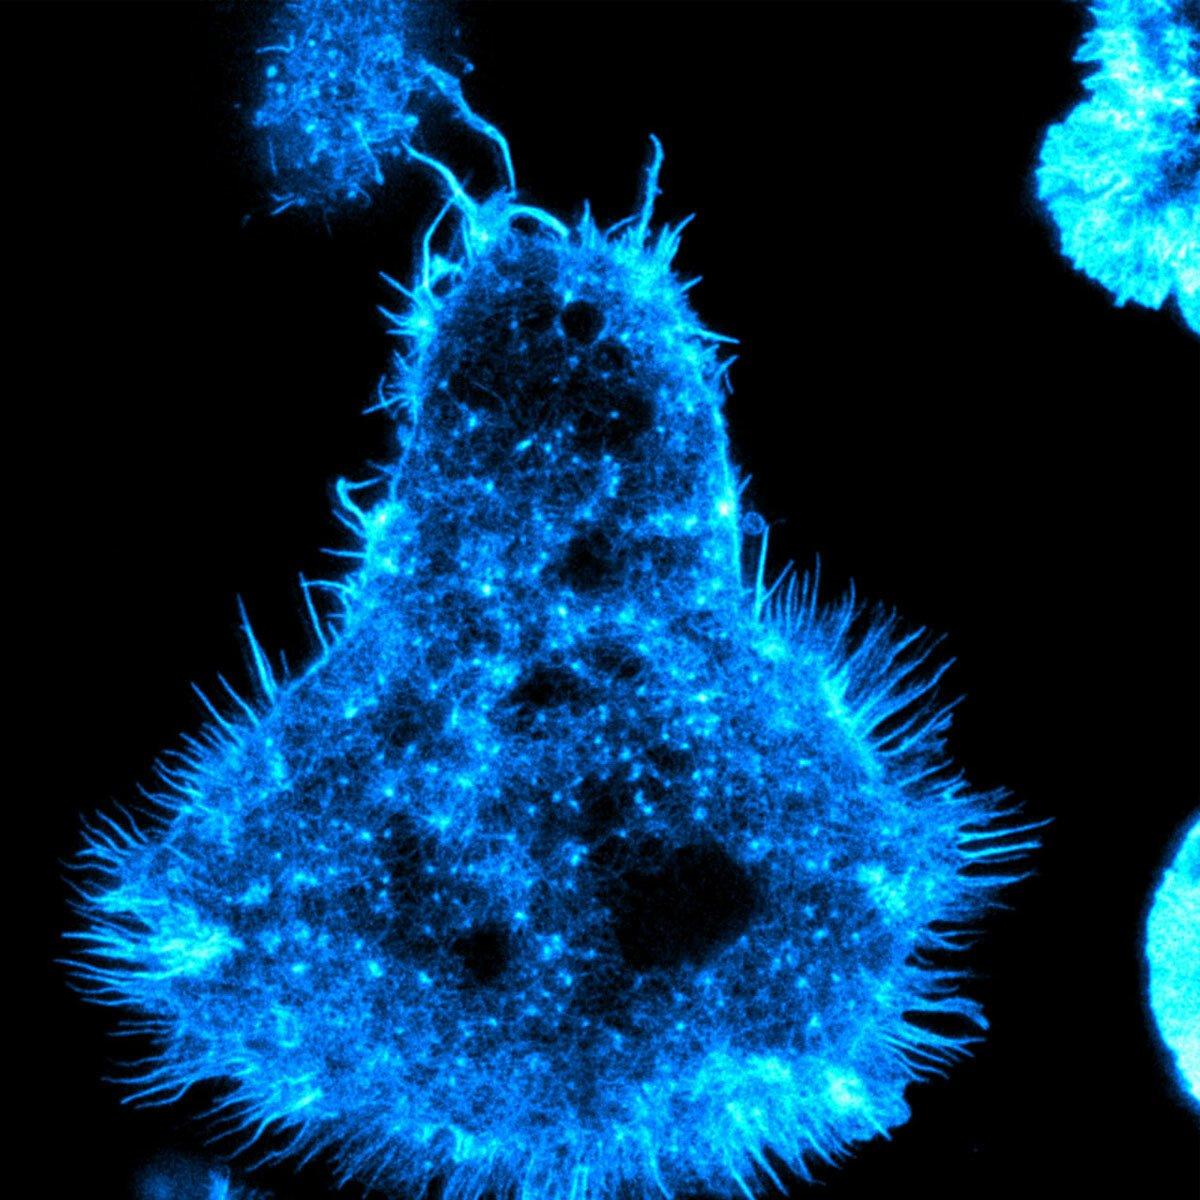 A high-resolution image of a natural killer cell